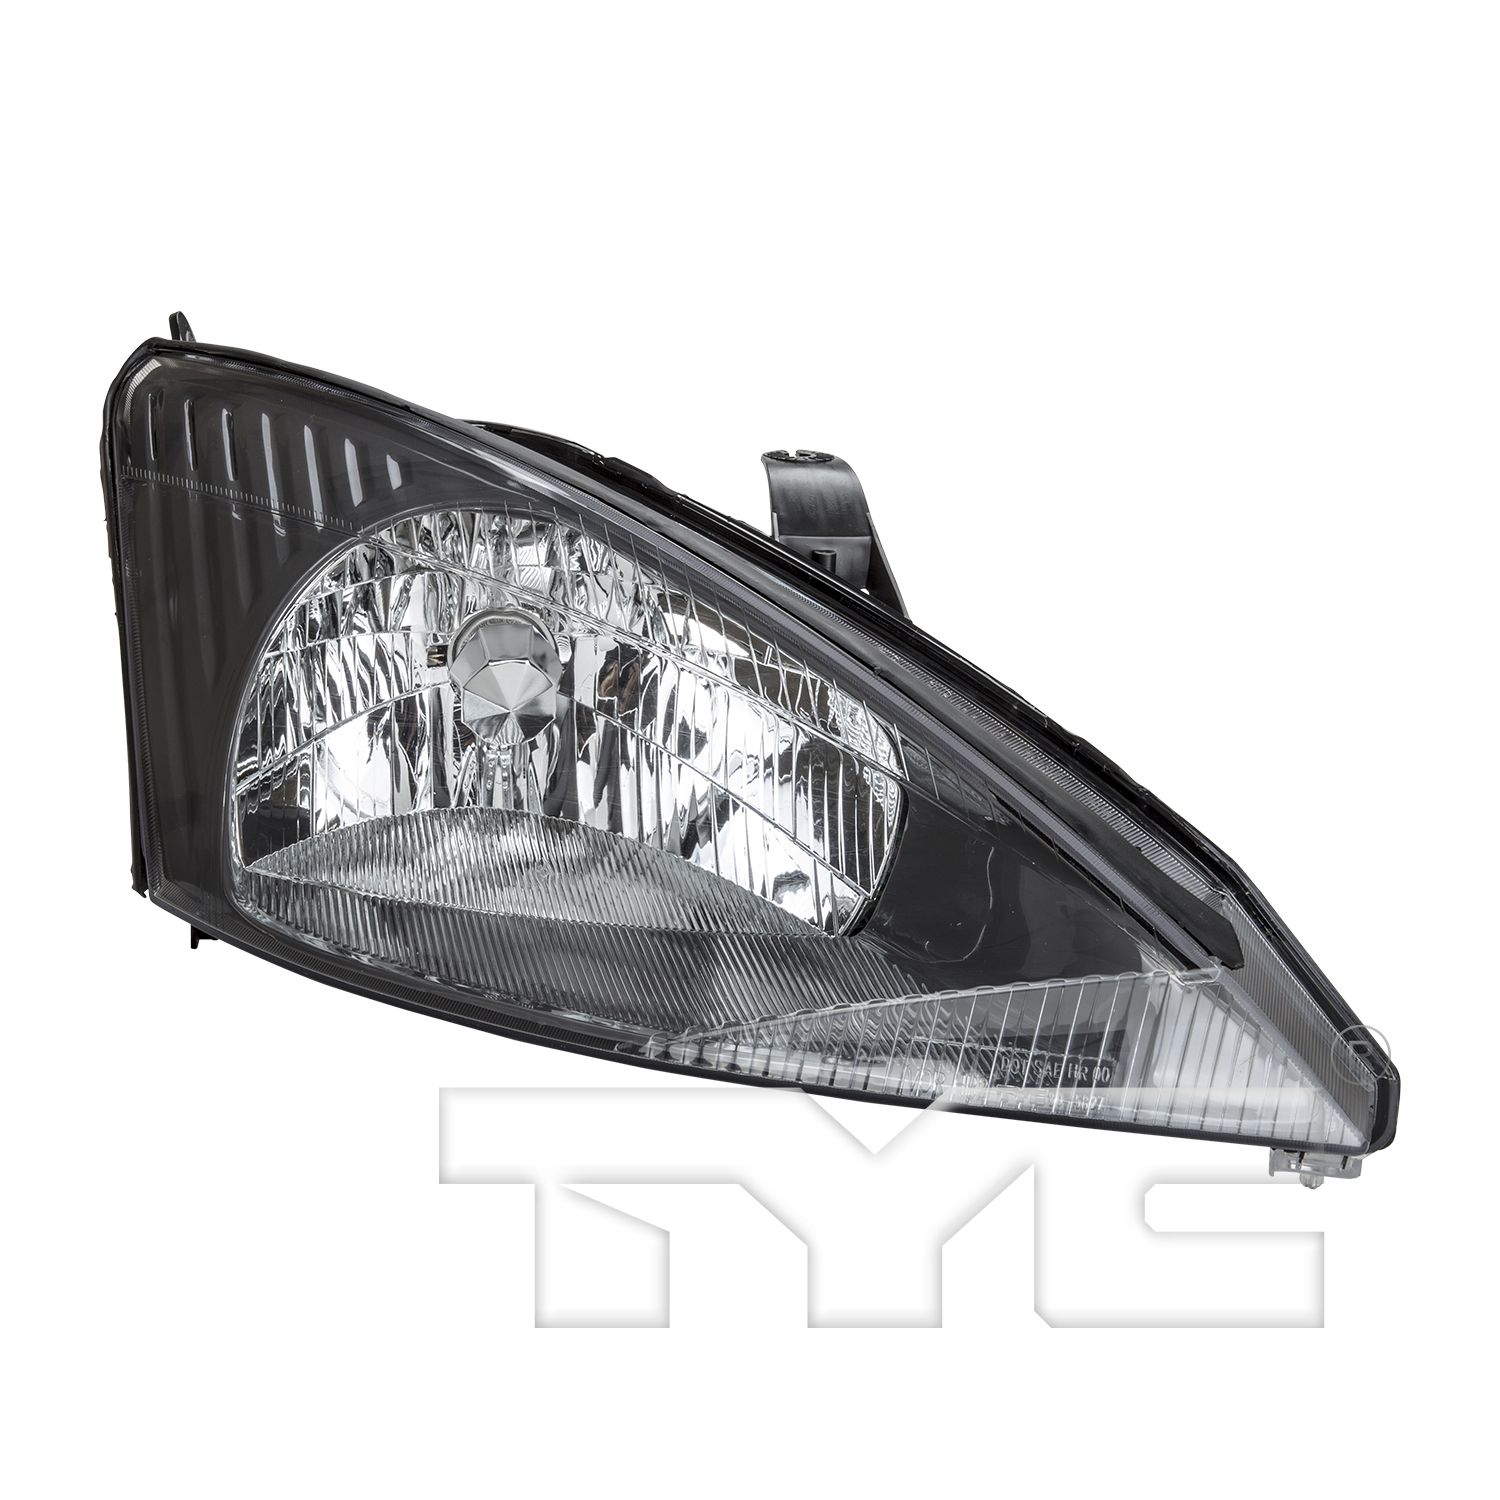 Aftermarket HEADLIGHTS for FORD - FOCUS, FOCUS,03-04,RT Headlamp assy composite